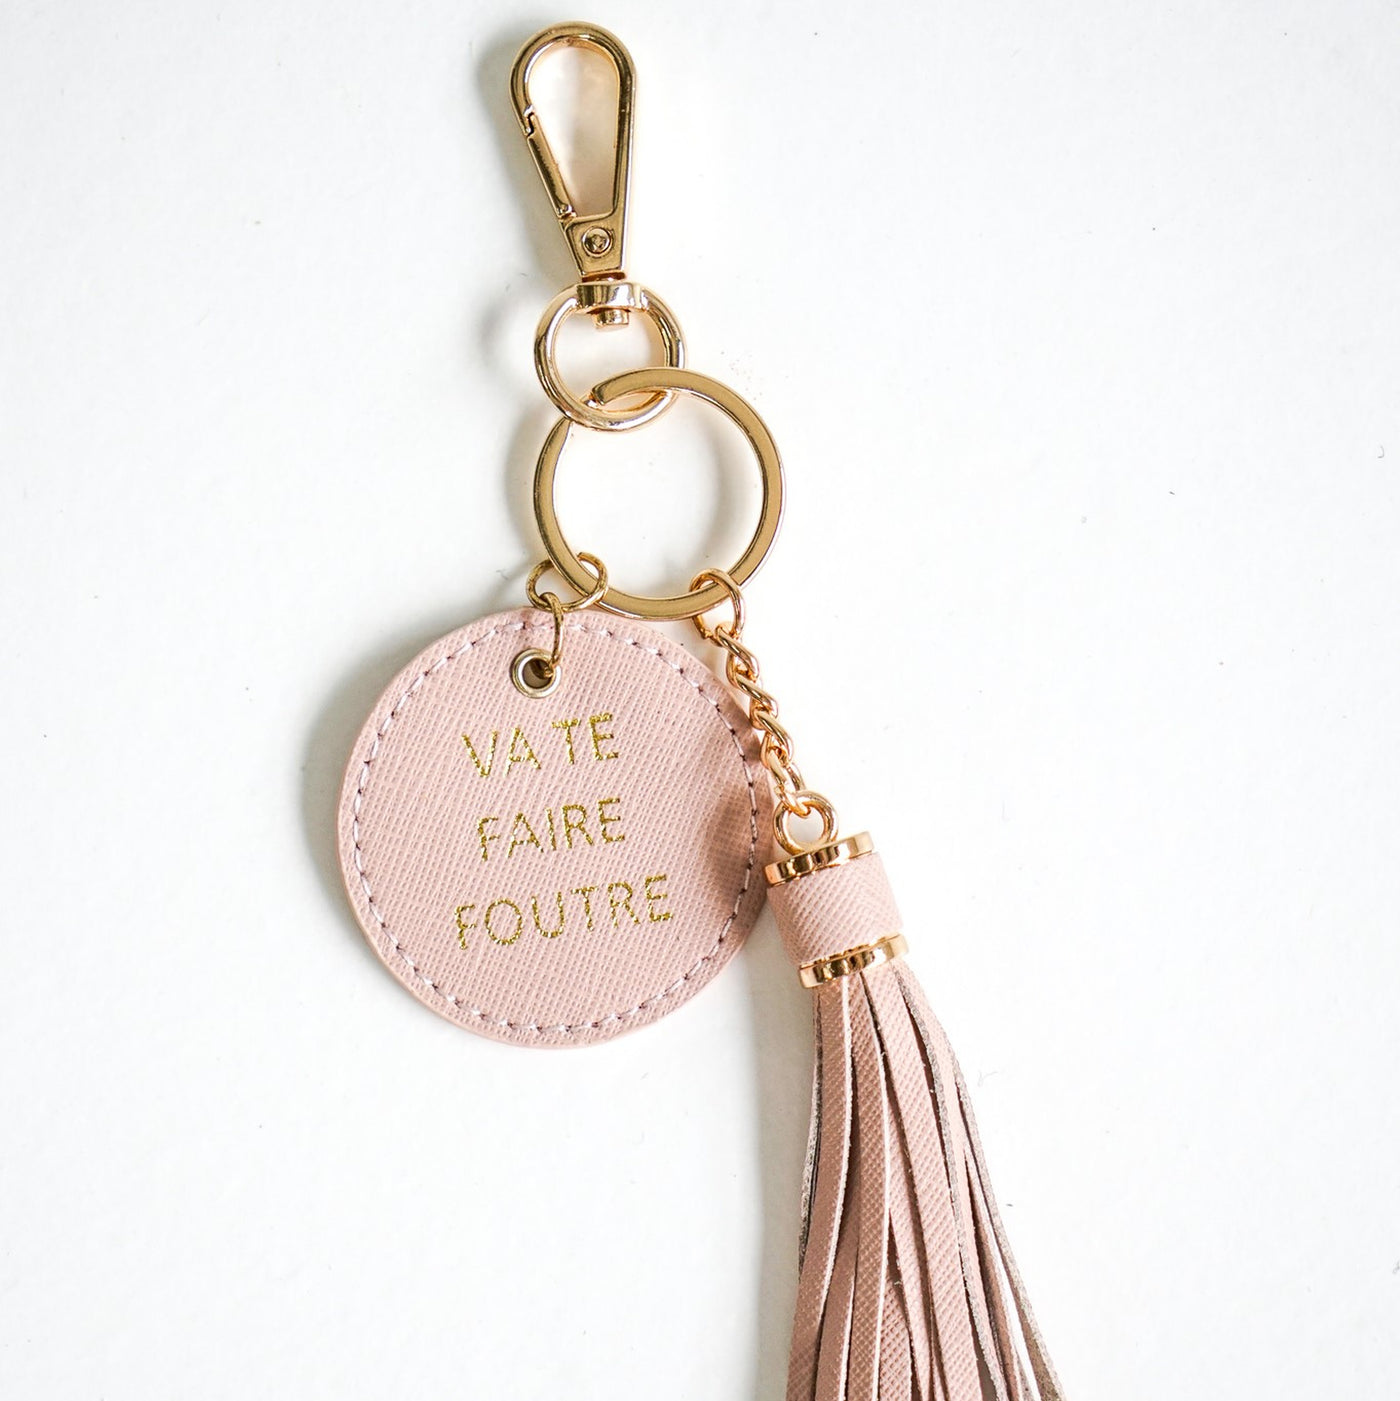 Go F yourself Blush keyring - Branche Store